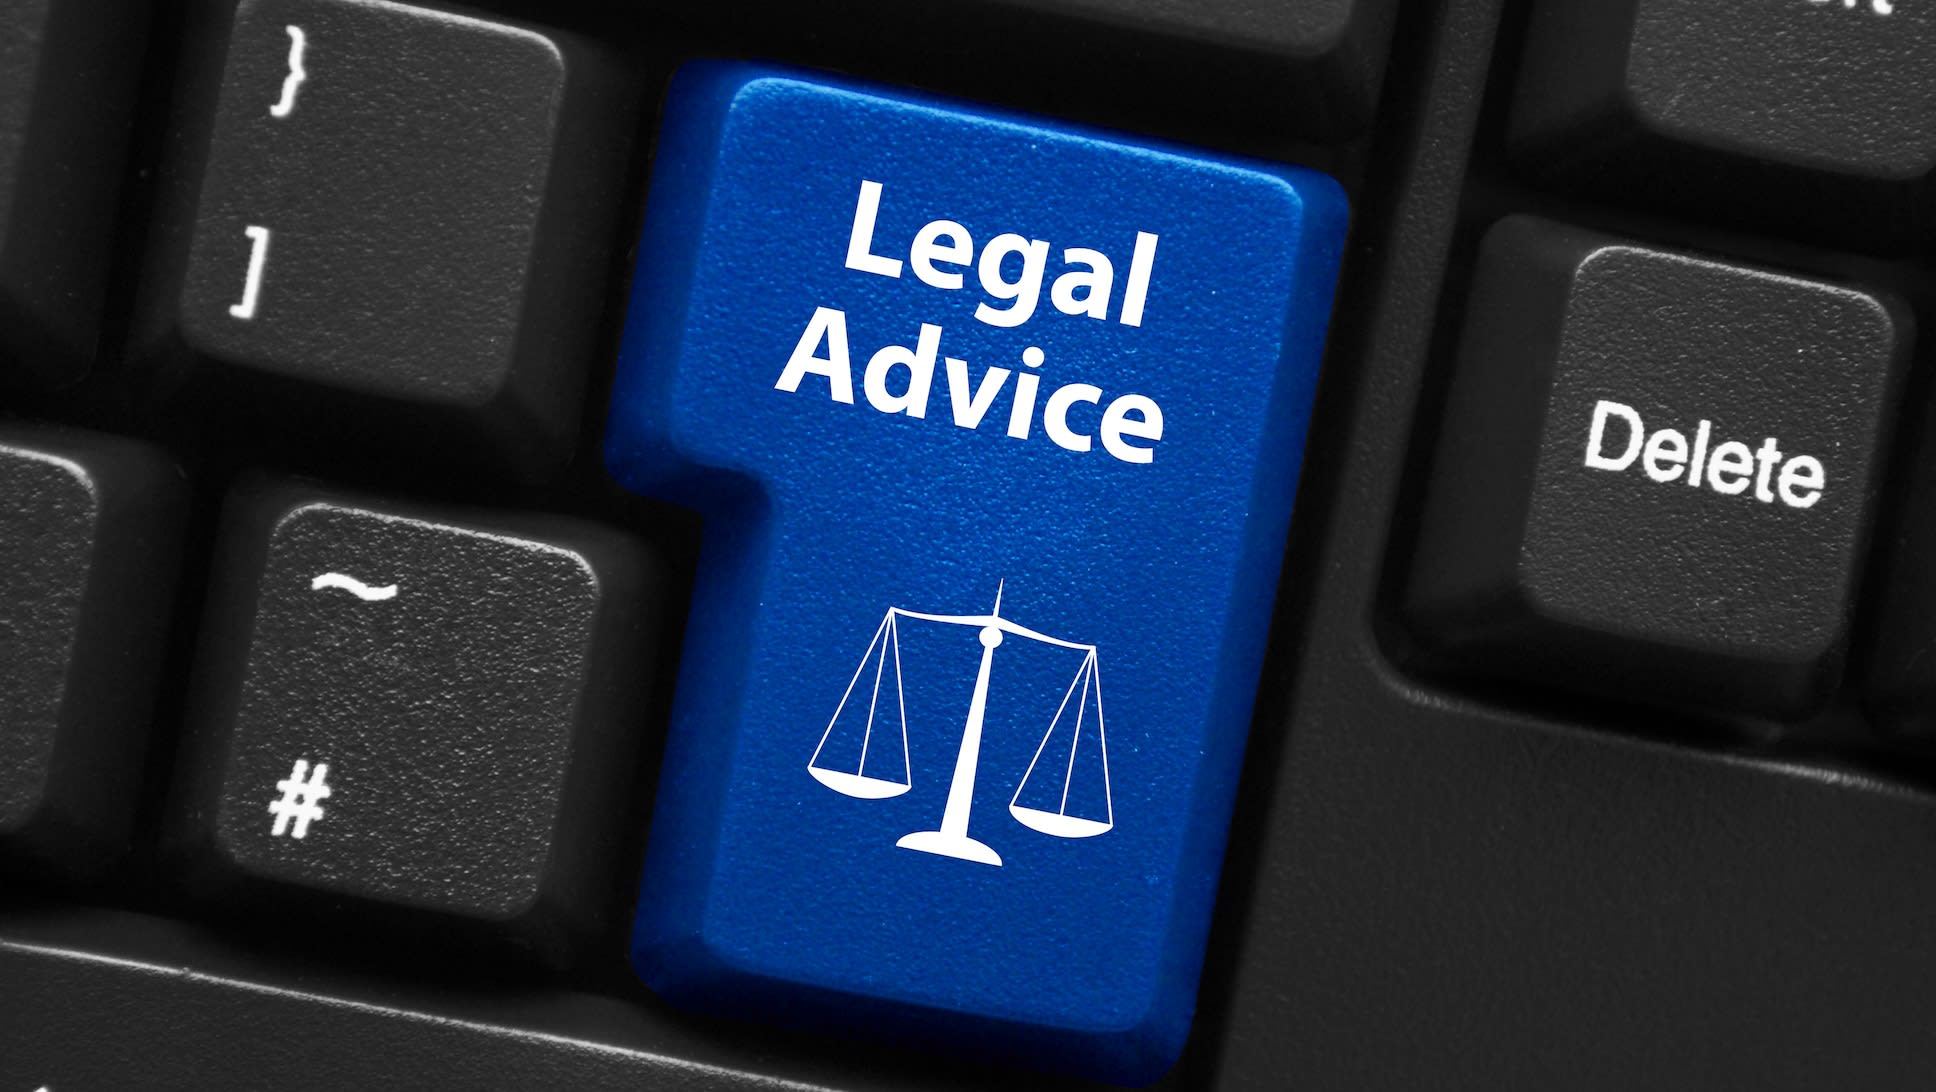 be your online lawyer and legal consultant by raeesmuhammad | fiverr